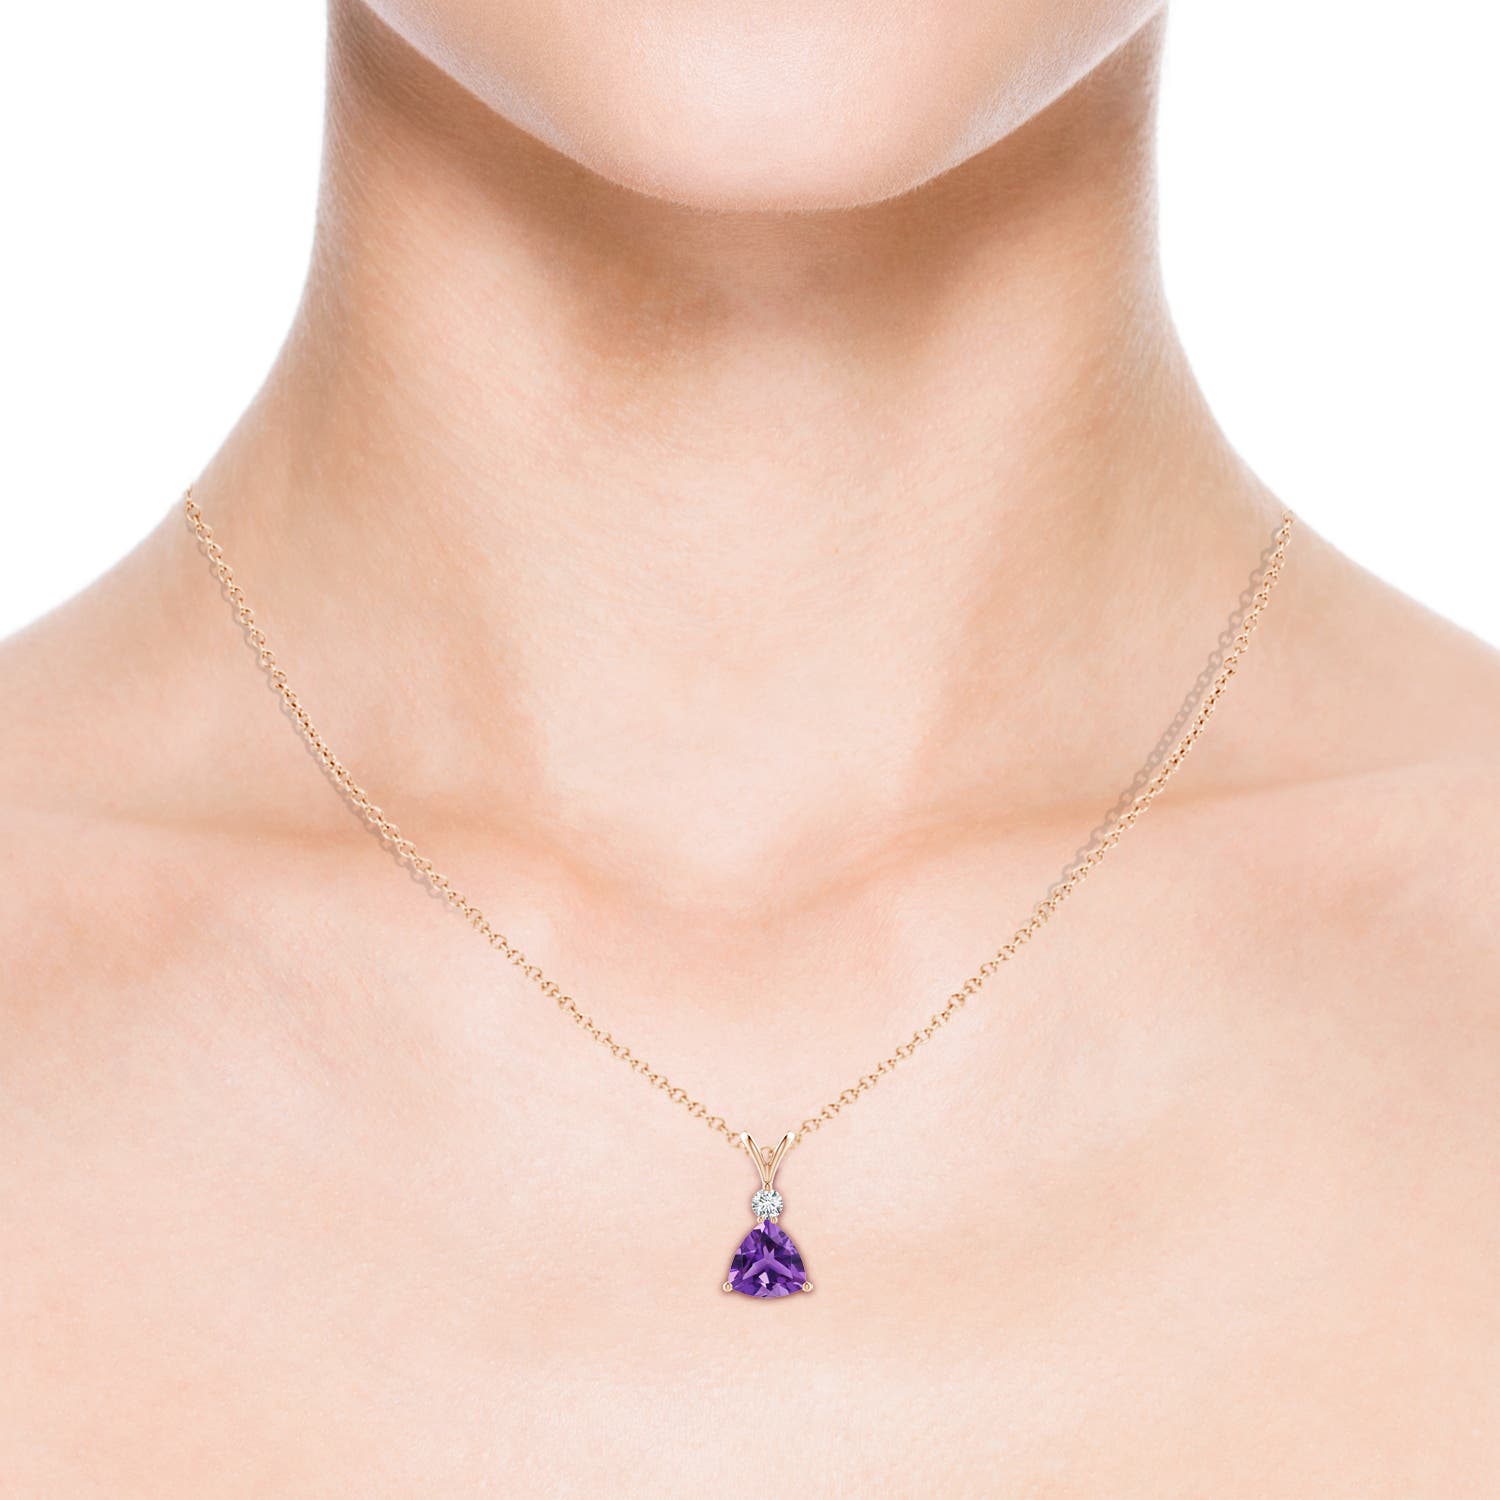 AAA - Amethyst / 1.21 CT / 14 KT Rose Gold